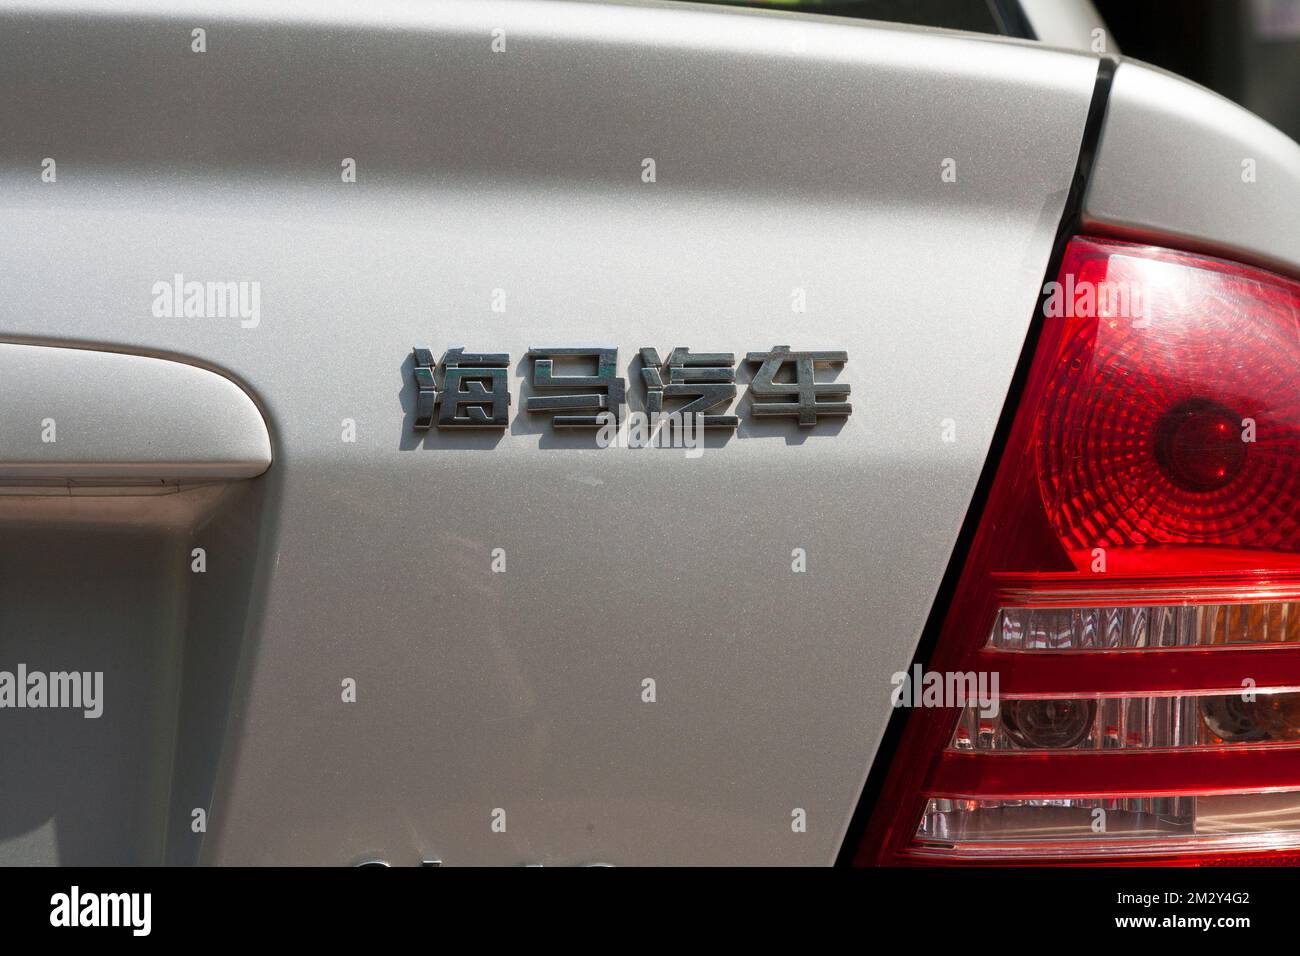 Mazda 323 car rear with section of numberplate and model written in Chinese characters / writing model name of vehicle in China. Xian, China. (125) Stock Photo